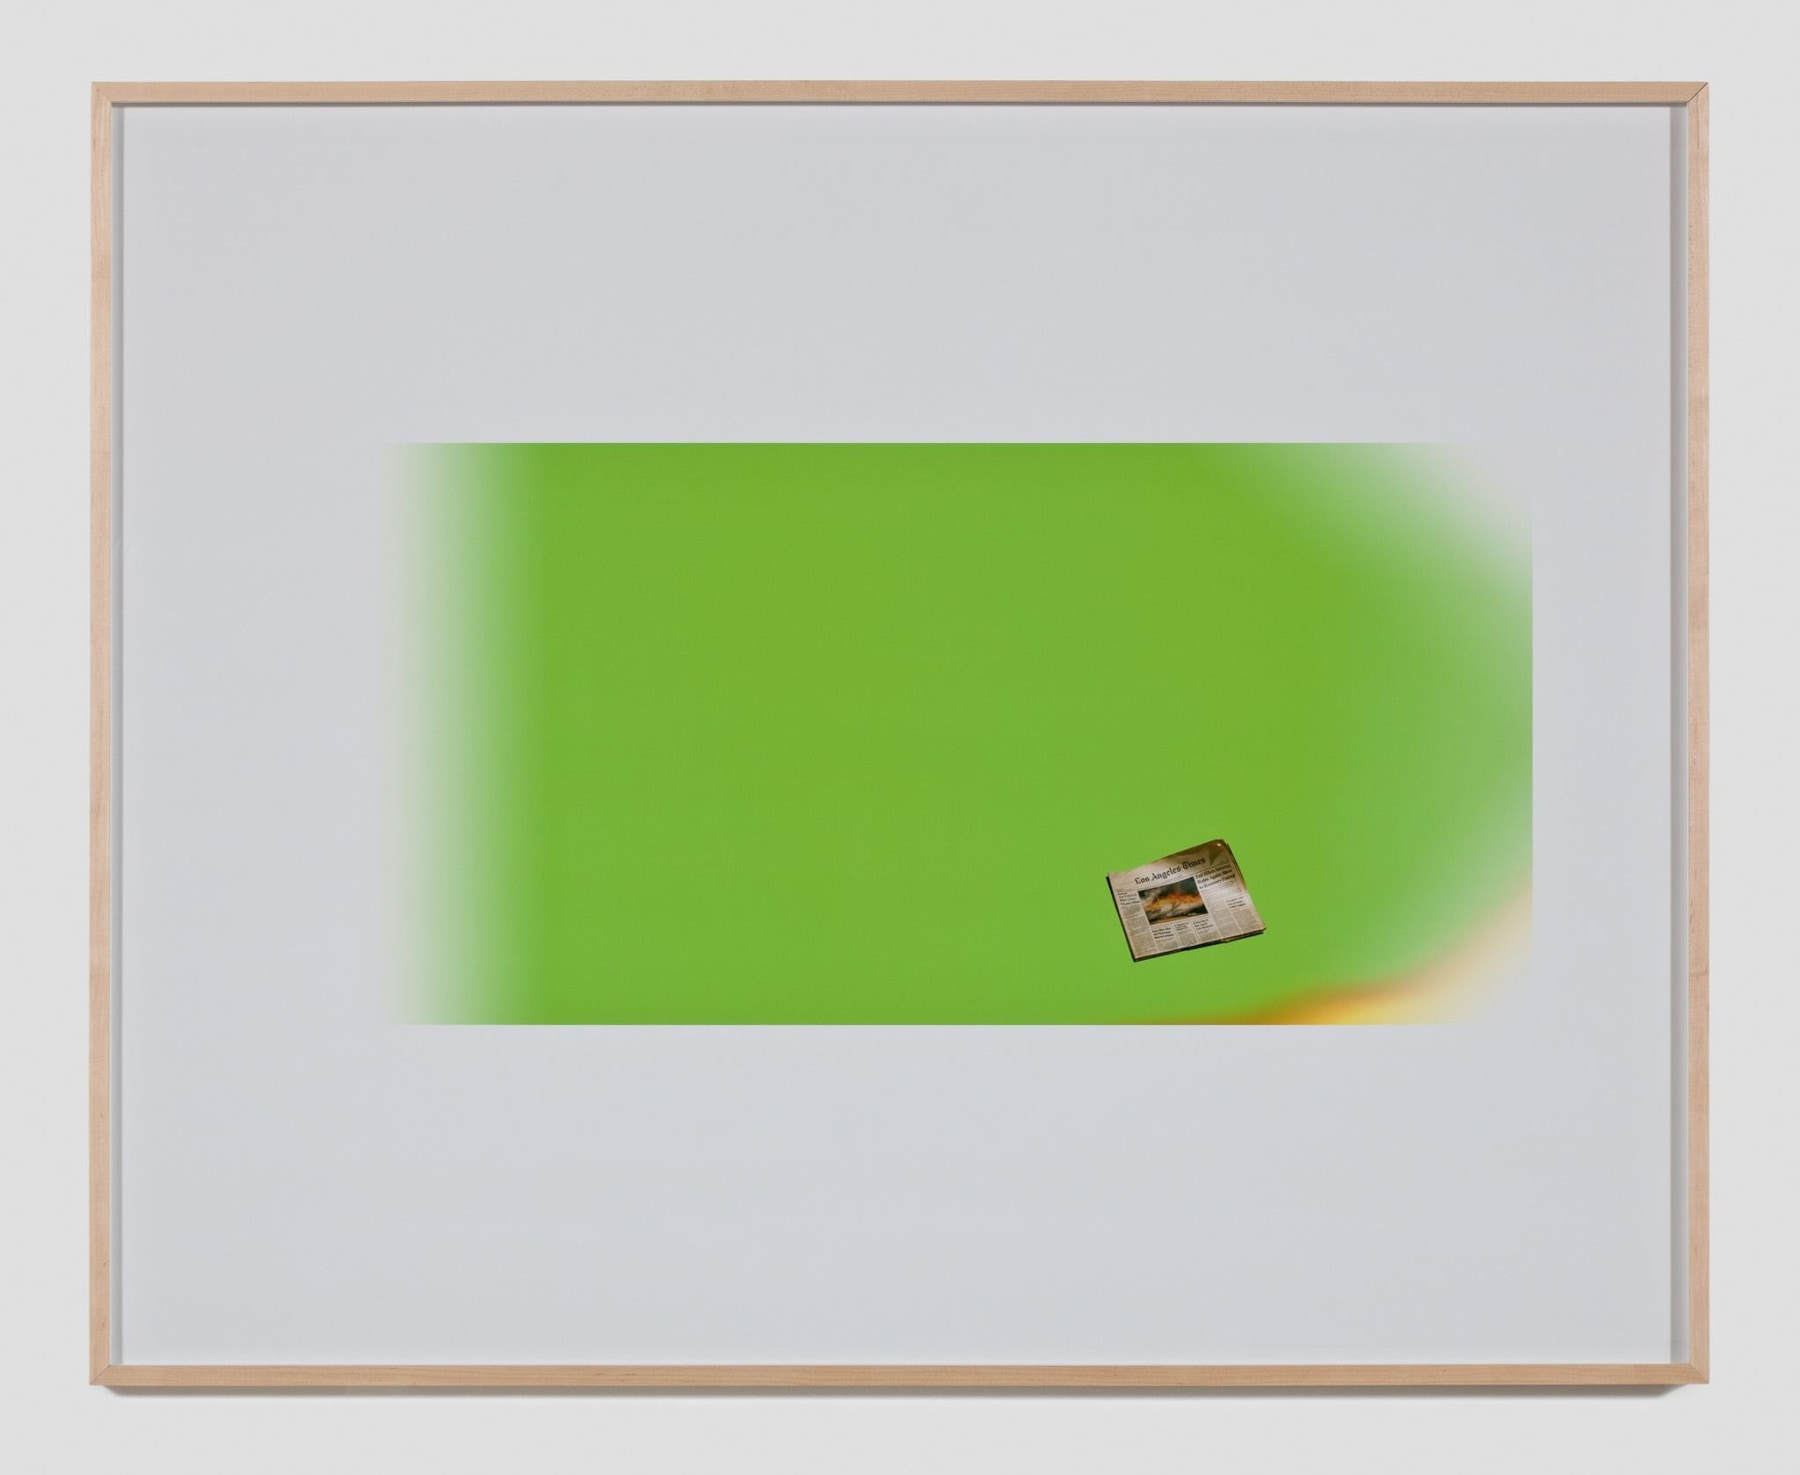 Larry Johnson, Untitled Green Screen Memory (Los Angeles Times), 2010